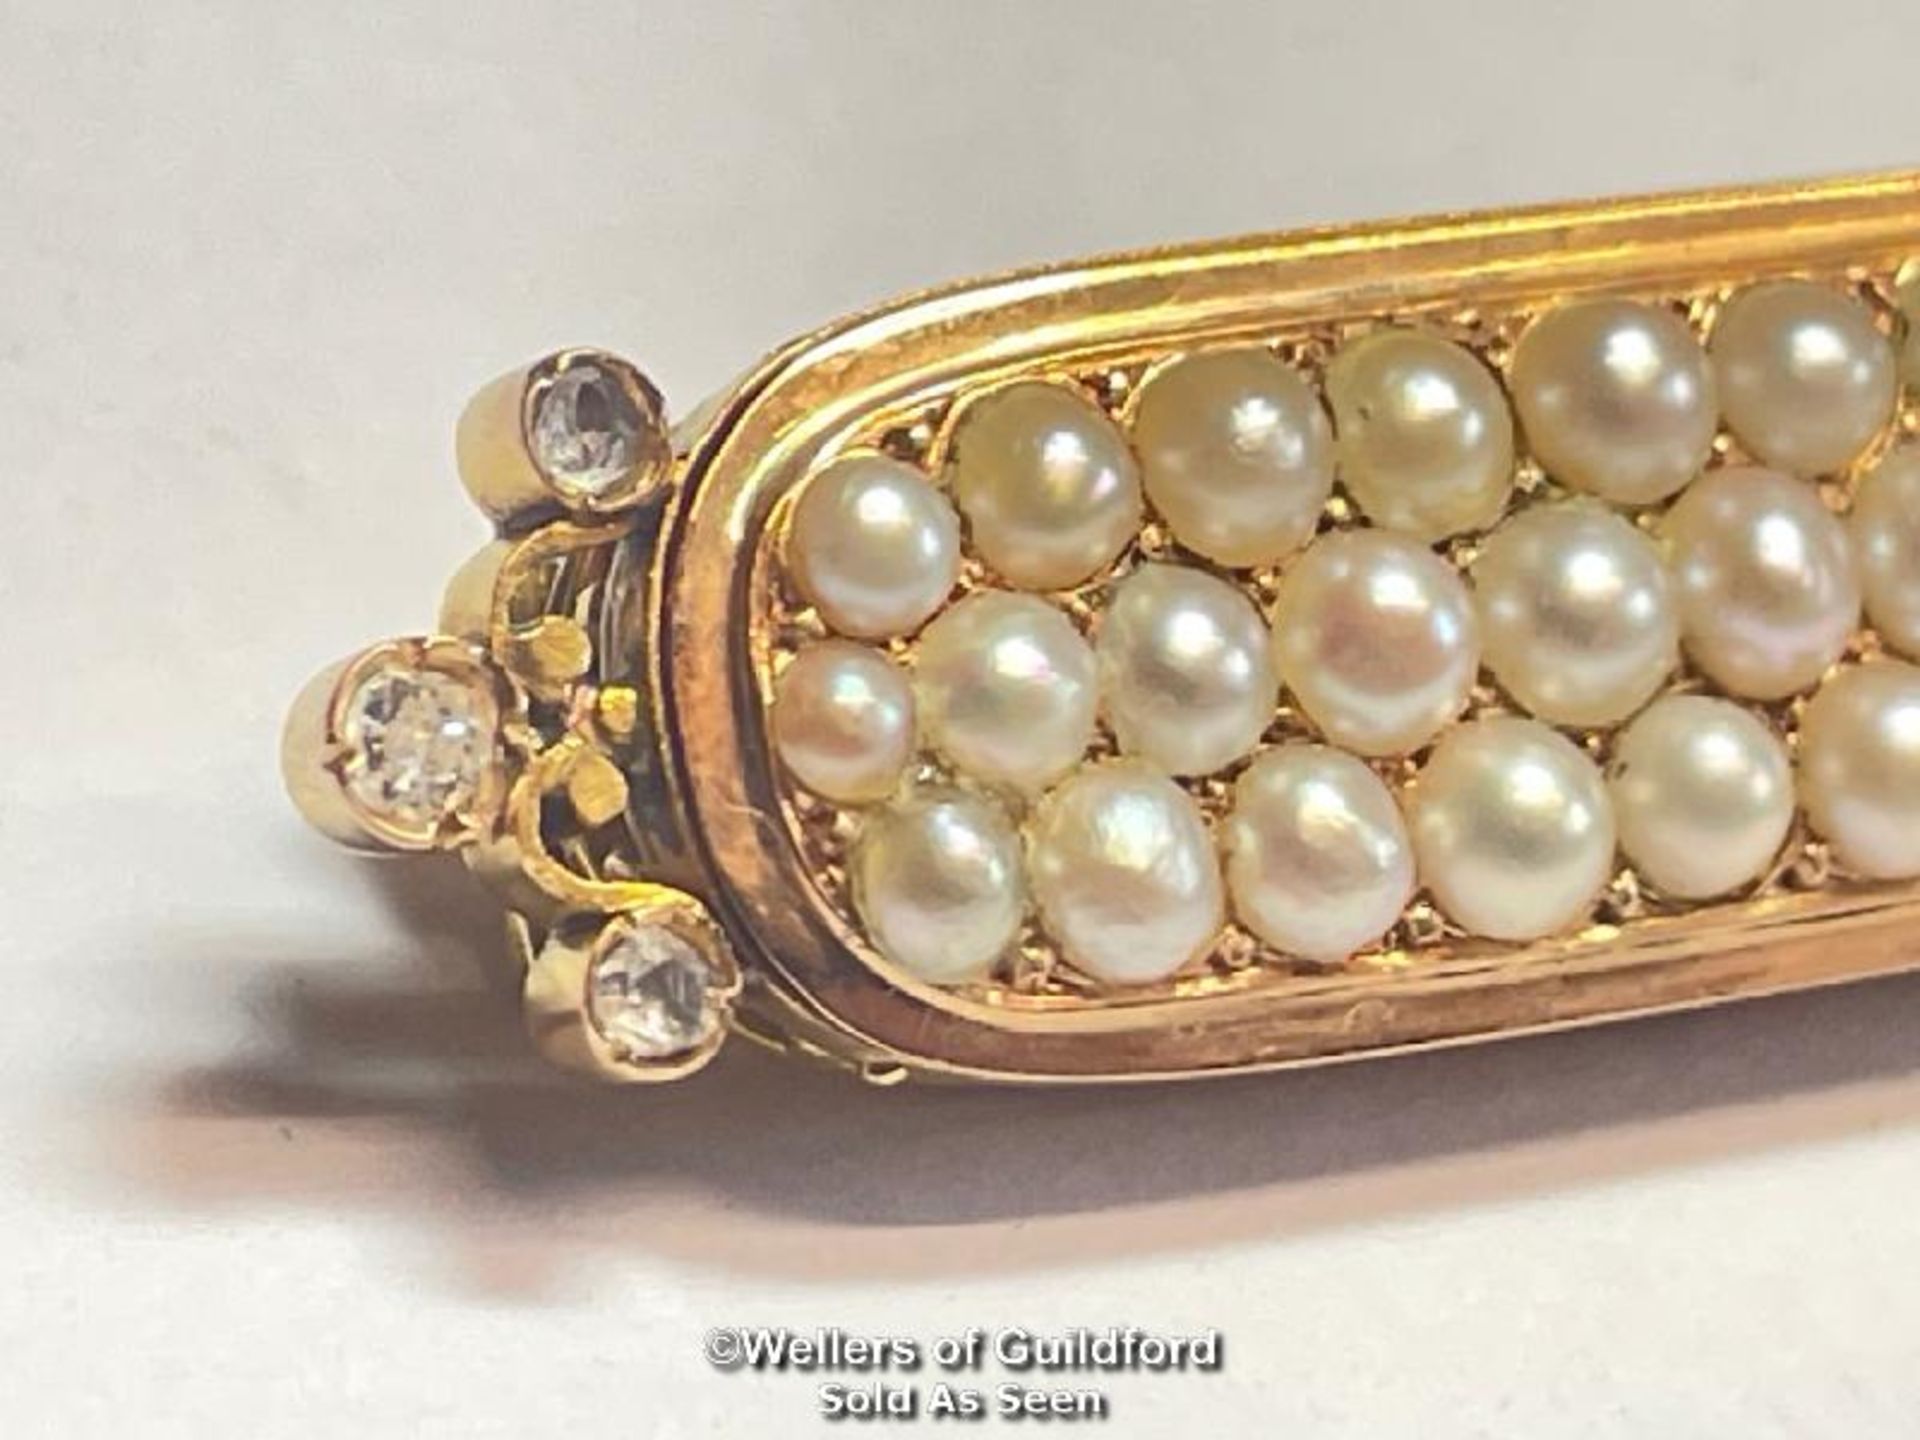 STOCK PIN IN YELLOW METAL WITH THREE ROWS OF SPLIT PEARLS AND ROSE CUT DIAMOND TERMINATIONS, NOT - Image 2 of 5